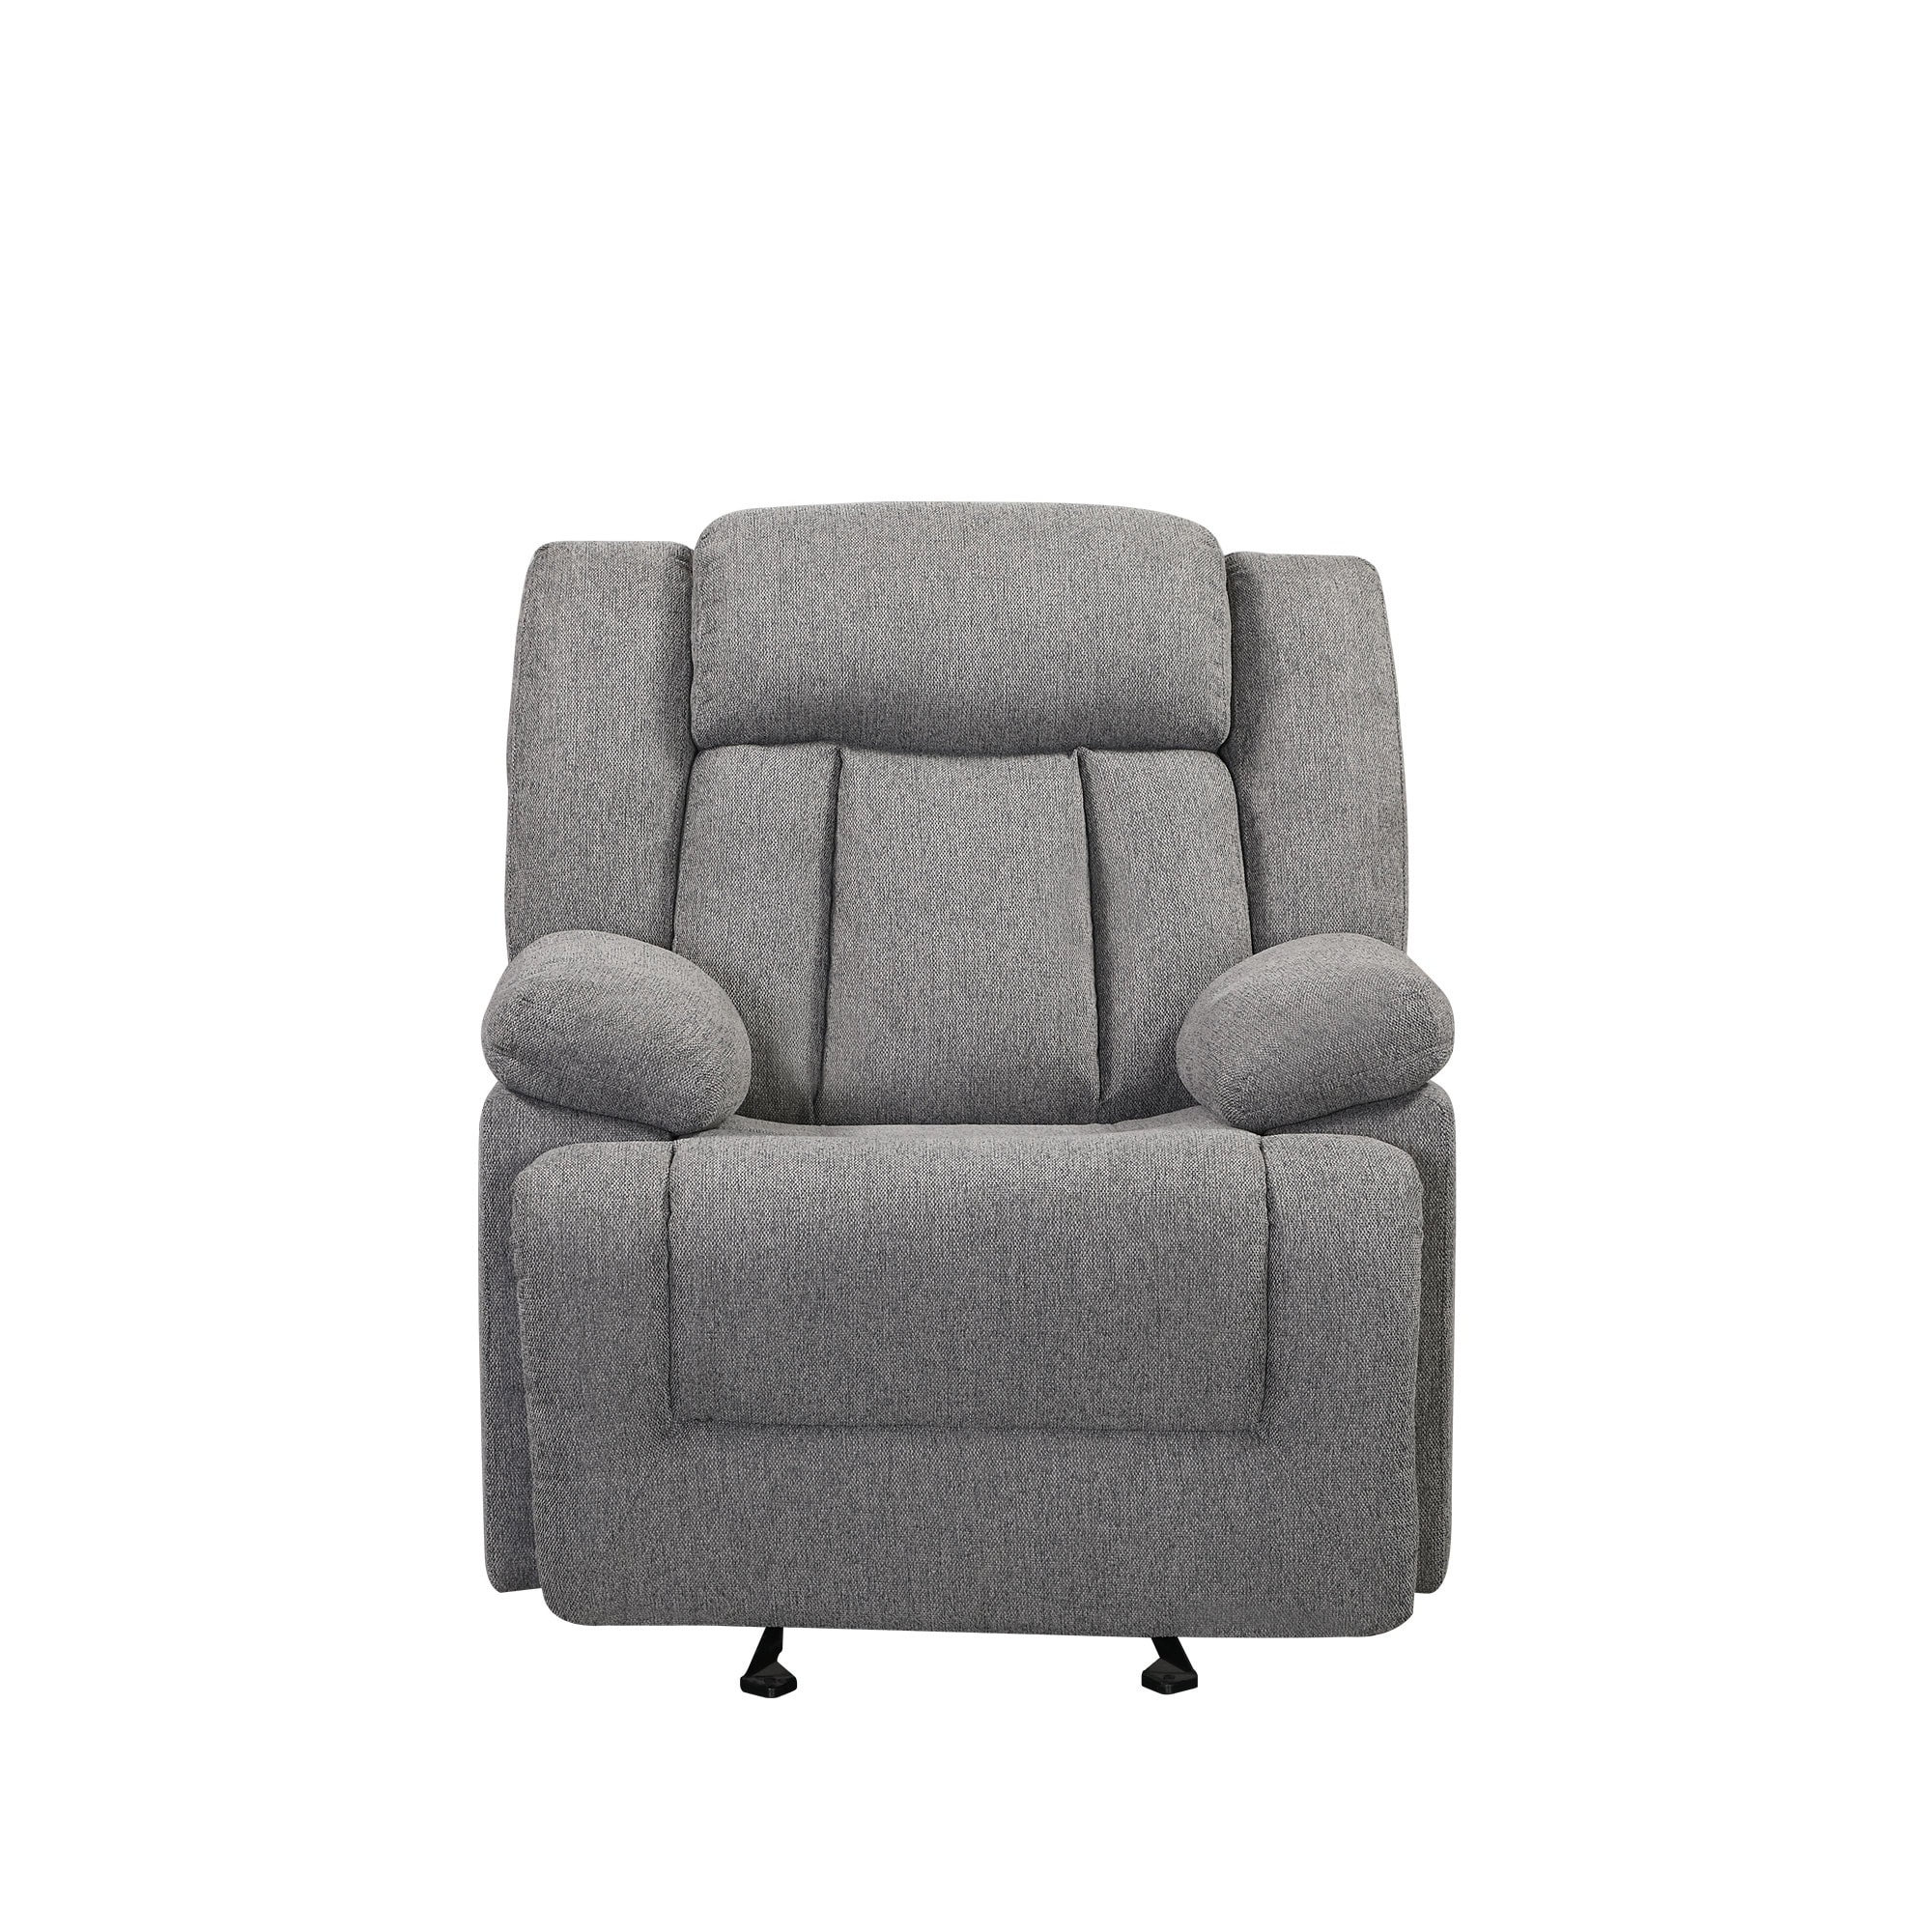 https://ak1.ostkcdn.com/images/products/is/images/direct/5ab2c0d03ab56c9bd7191c209ca50c5393408822/CTEX-Fabric-Recliner-Chair-Adjustable-Home-Theater-Single-Recliner-Thick-Seat-and-Backrest%2C-Rocking-Sofa-for-Living-Room.jpg